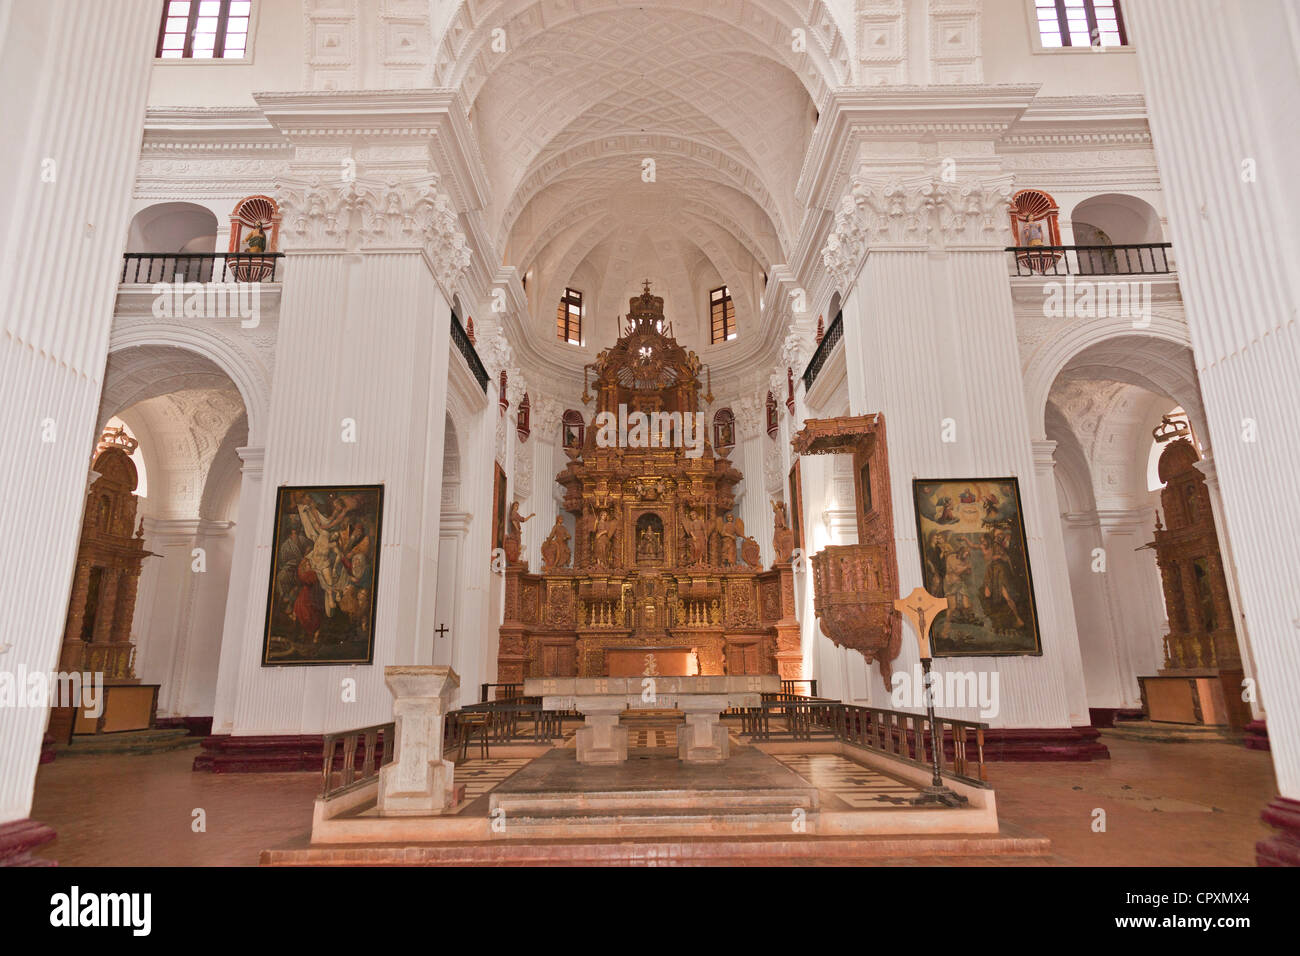 The St. Cajetan church is located in Old Goa near the Se cathedral church. Stock Photo